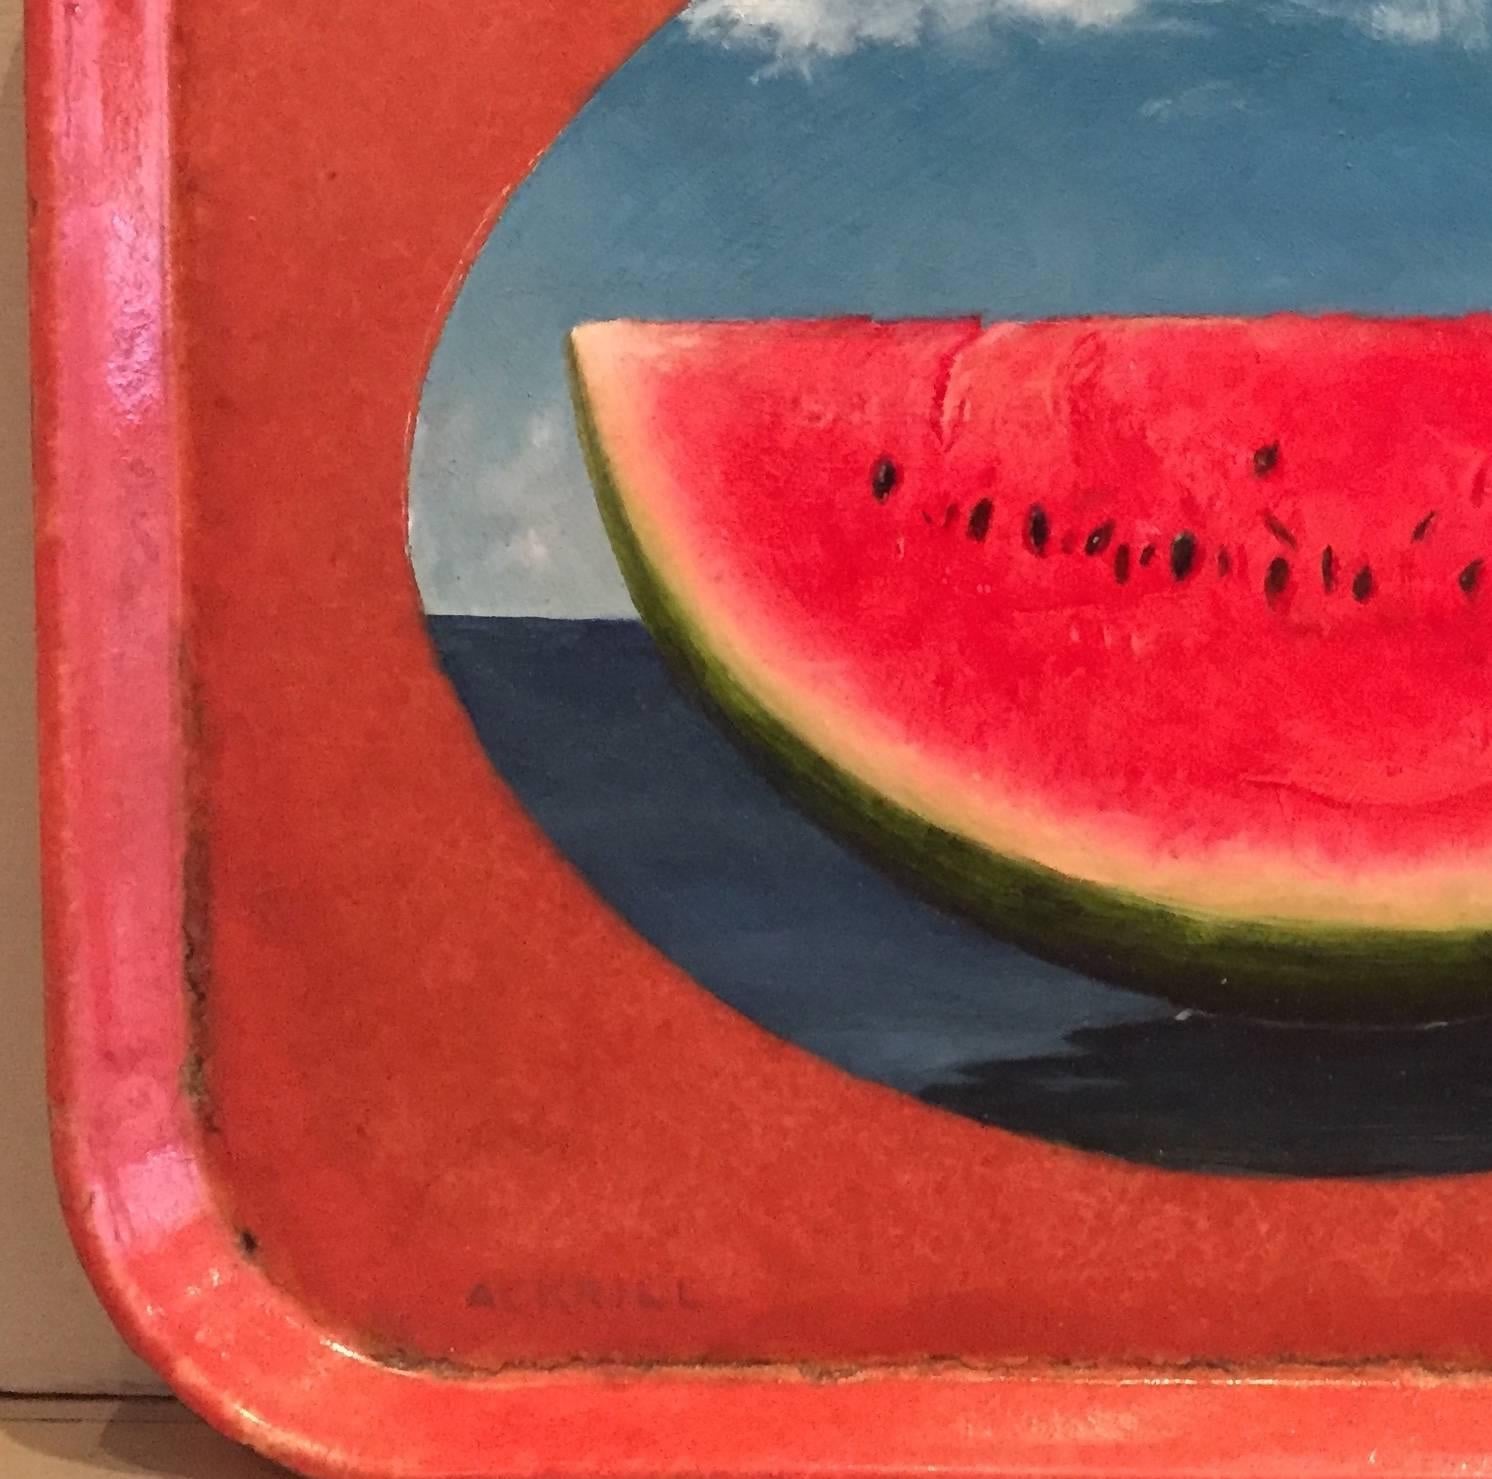 “Water Melon” unique surrealist painting of fruit on real food tray, pop art - Pop Art Painting by Anthony Ackrill